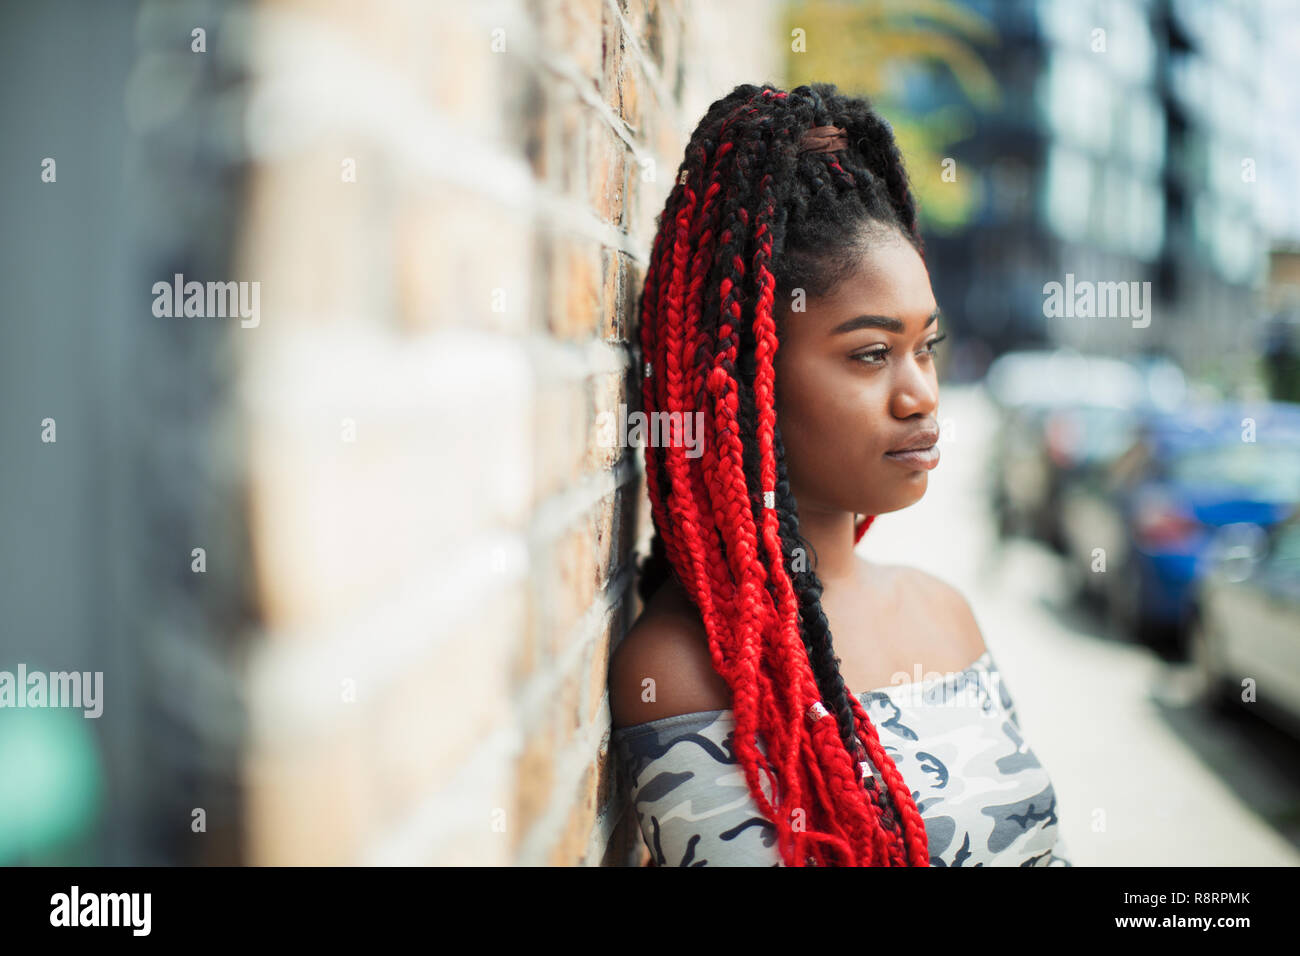 Confident young woman with red braids looking away on urban street Stock Photo